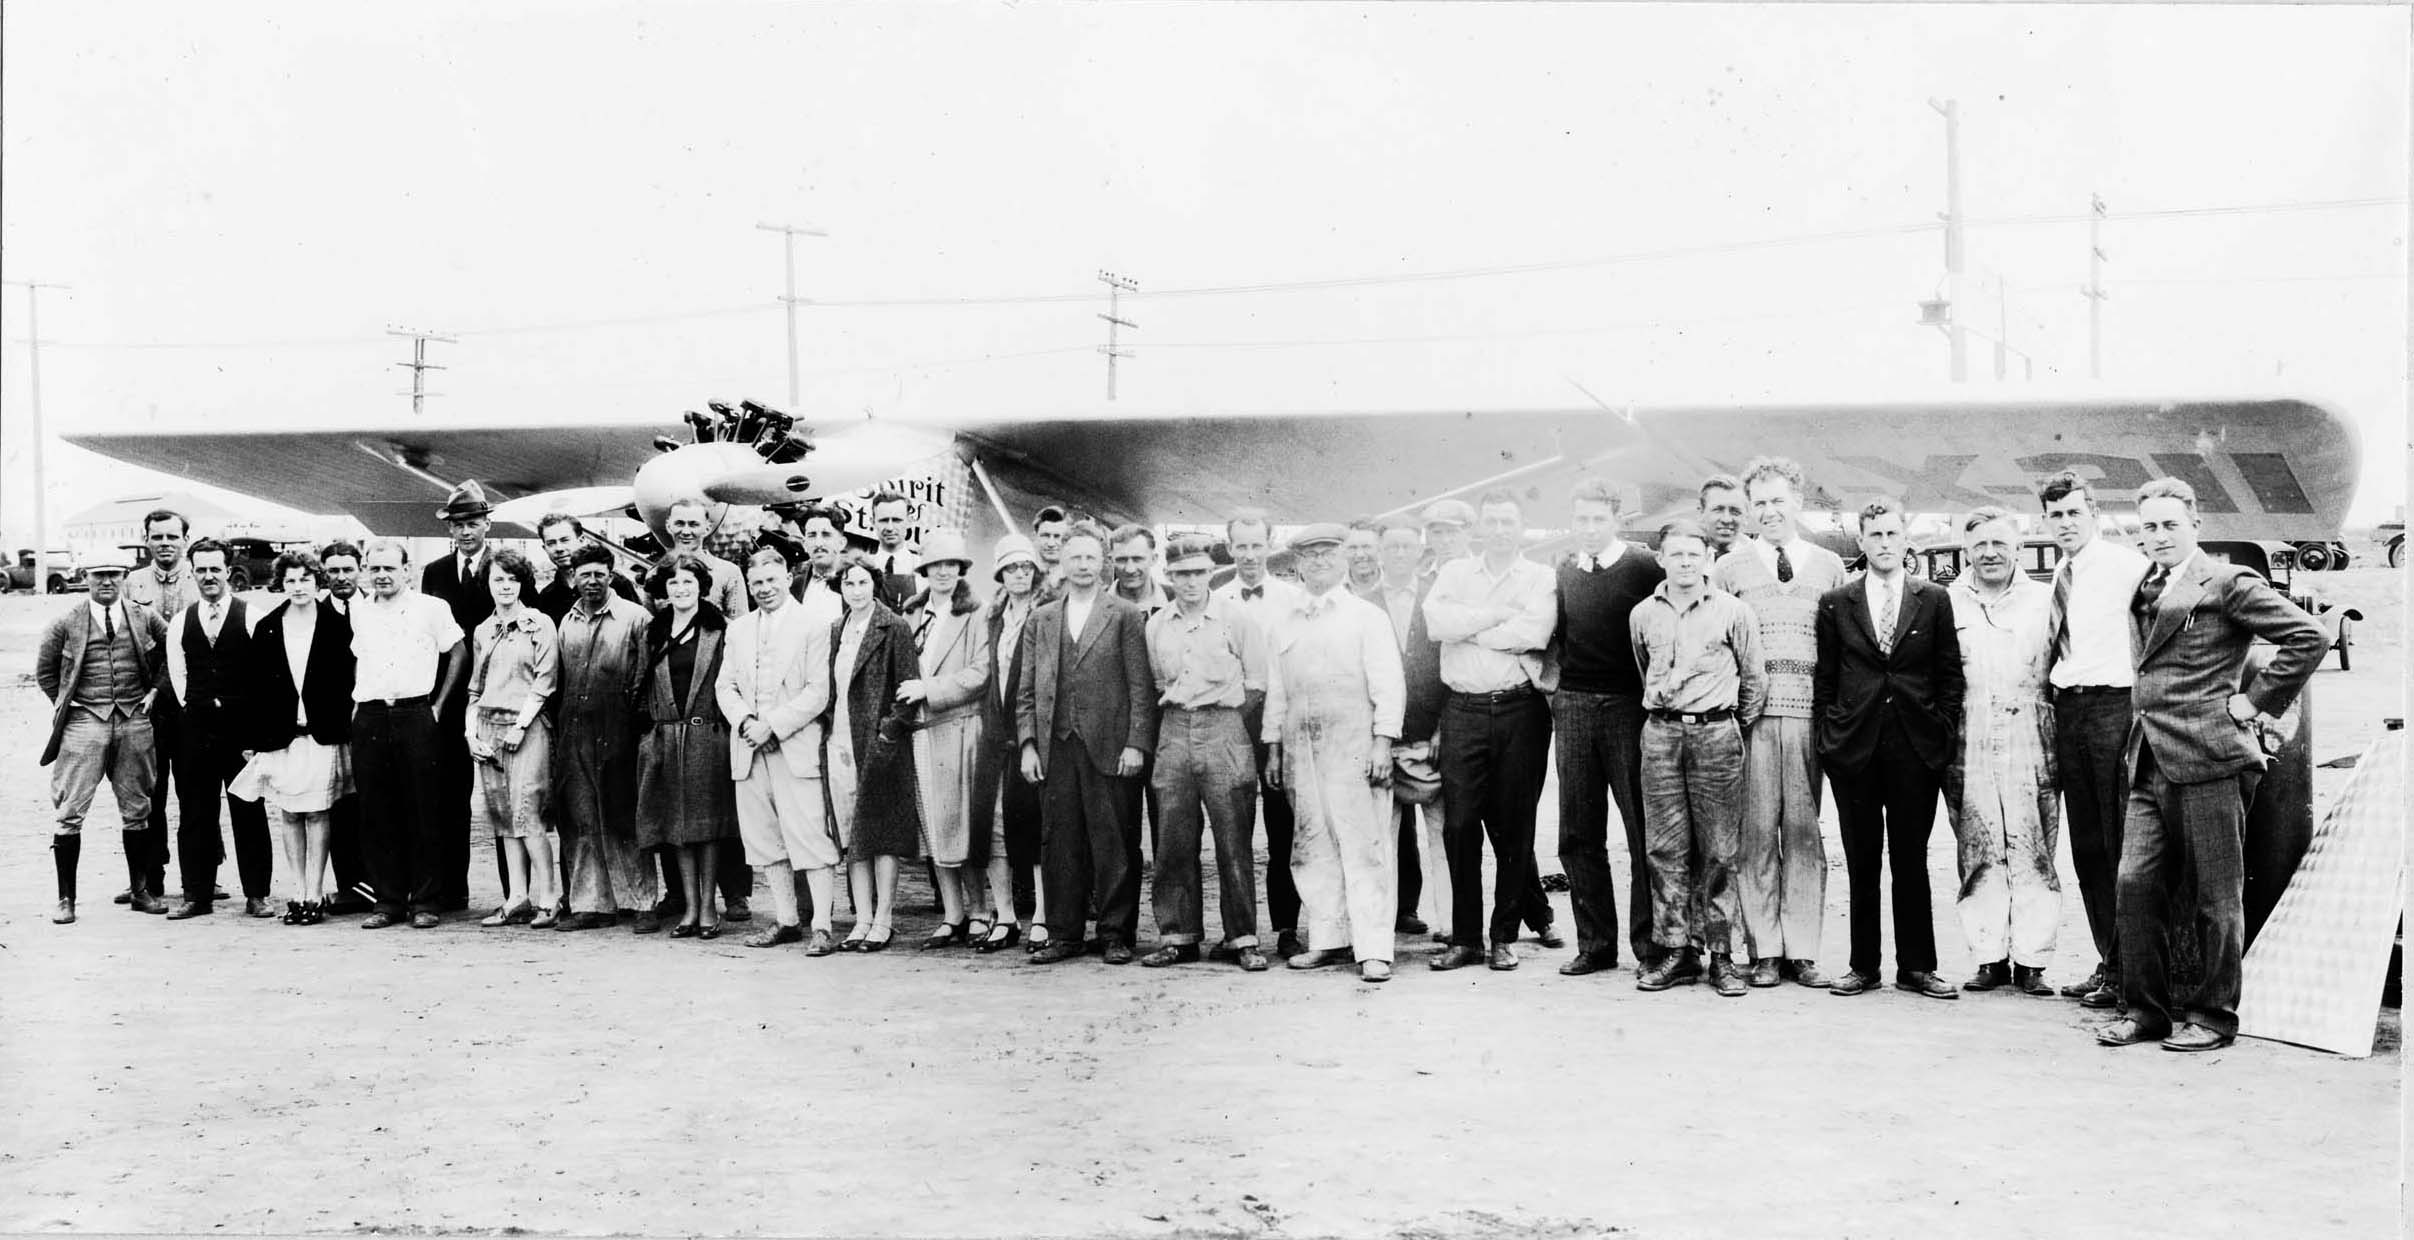 A vintage black and white team photograph of the Spirit of St. Louis with the majority of the work crew that assembled the plane at Ryan Airlines in San Diego, California May 1927. Including pilot Charles Lindbergh, designer Donald Hall, owner Ben Mahoney, AJ Edwards, and production manager Hawley Bowlus.